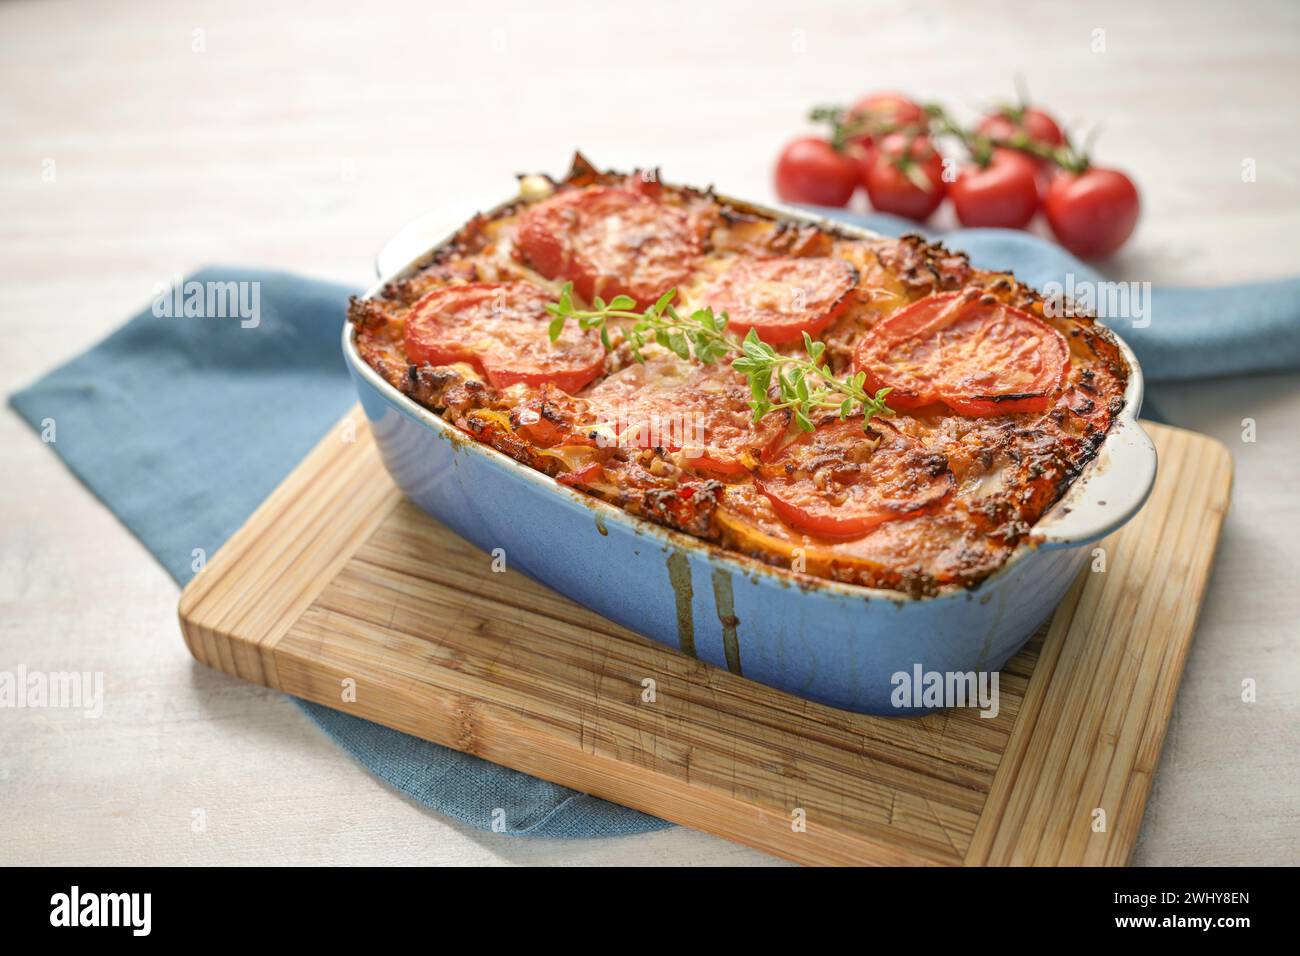 Lasagna, fresh from the oven, casserole dish of flat pasta sheets, ground beef sauce, vegetables and tomatoes, topped with melte Stock Photo